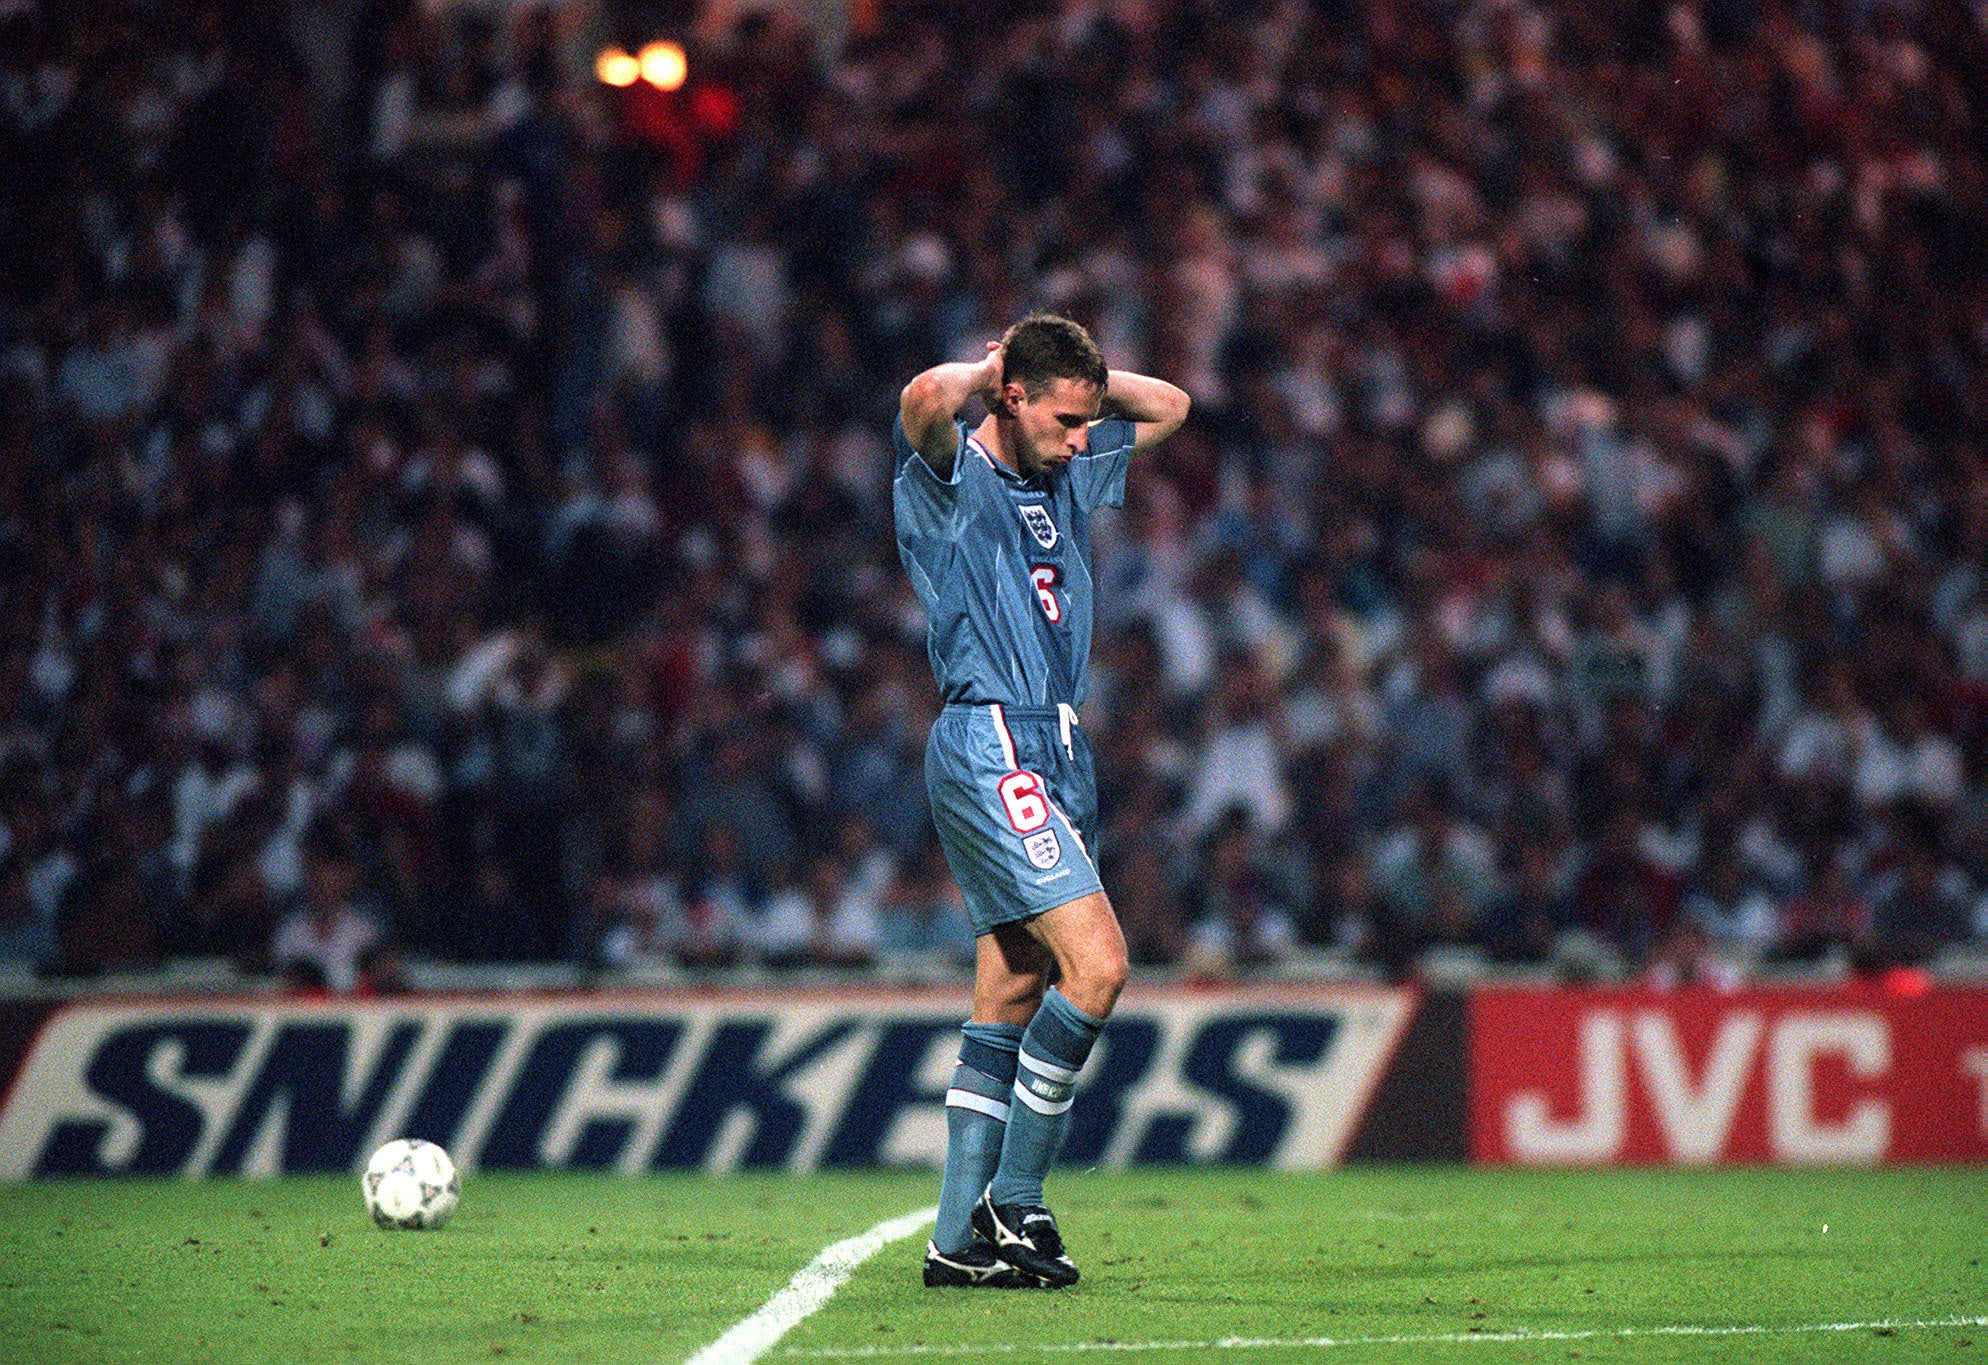 Gareth Southgate failed to score in the penalty shoot-out loss to Germany at Euro 96 (PA)